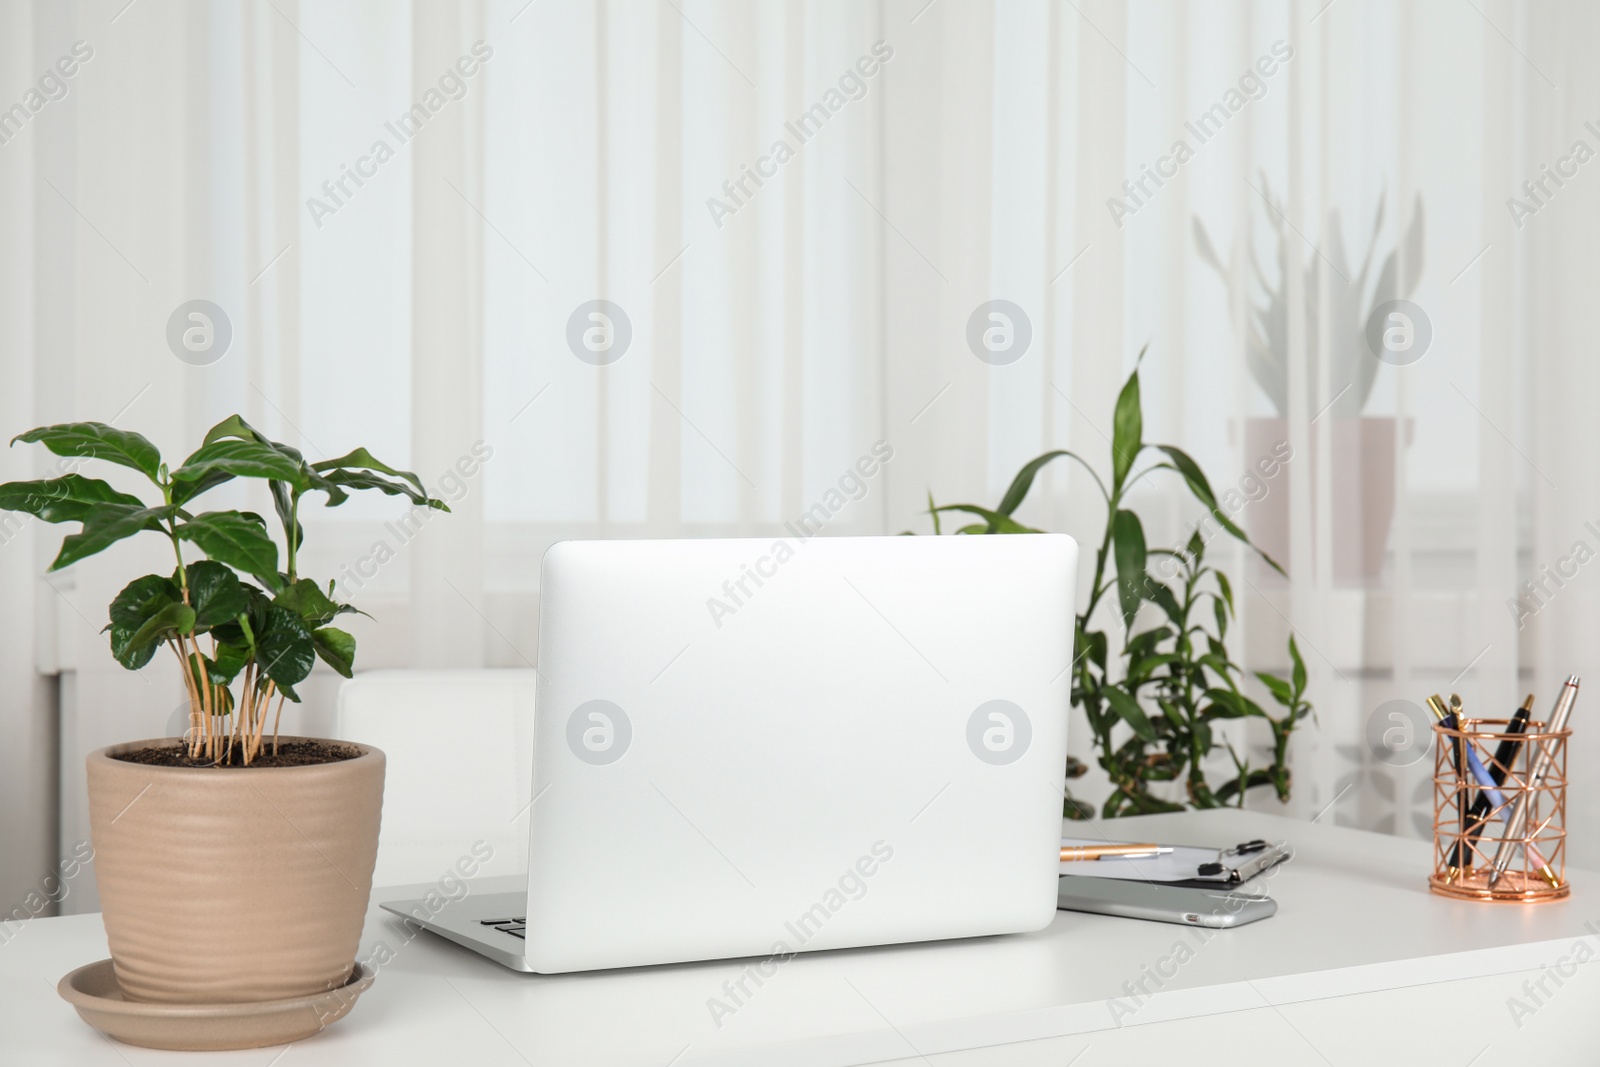 Photo of Houseplants and laptop on table in office interior, space for text